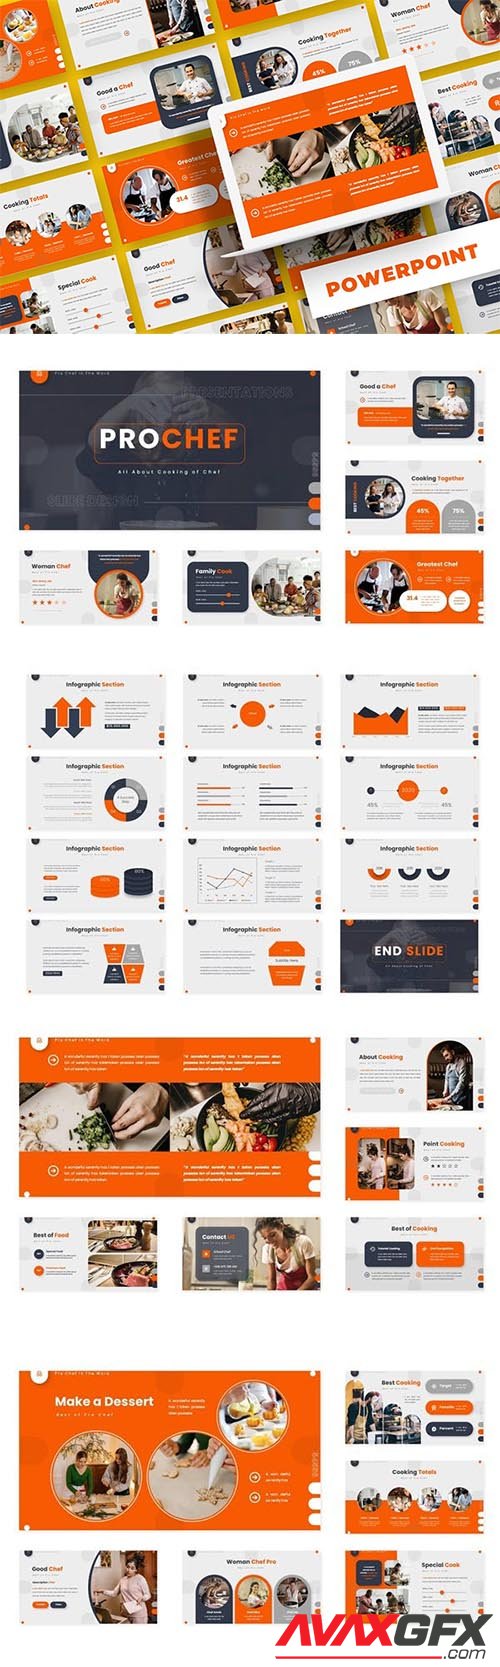 Pro Chef - Powerpoint Template